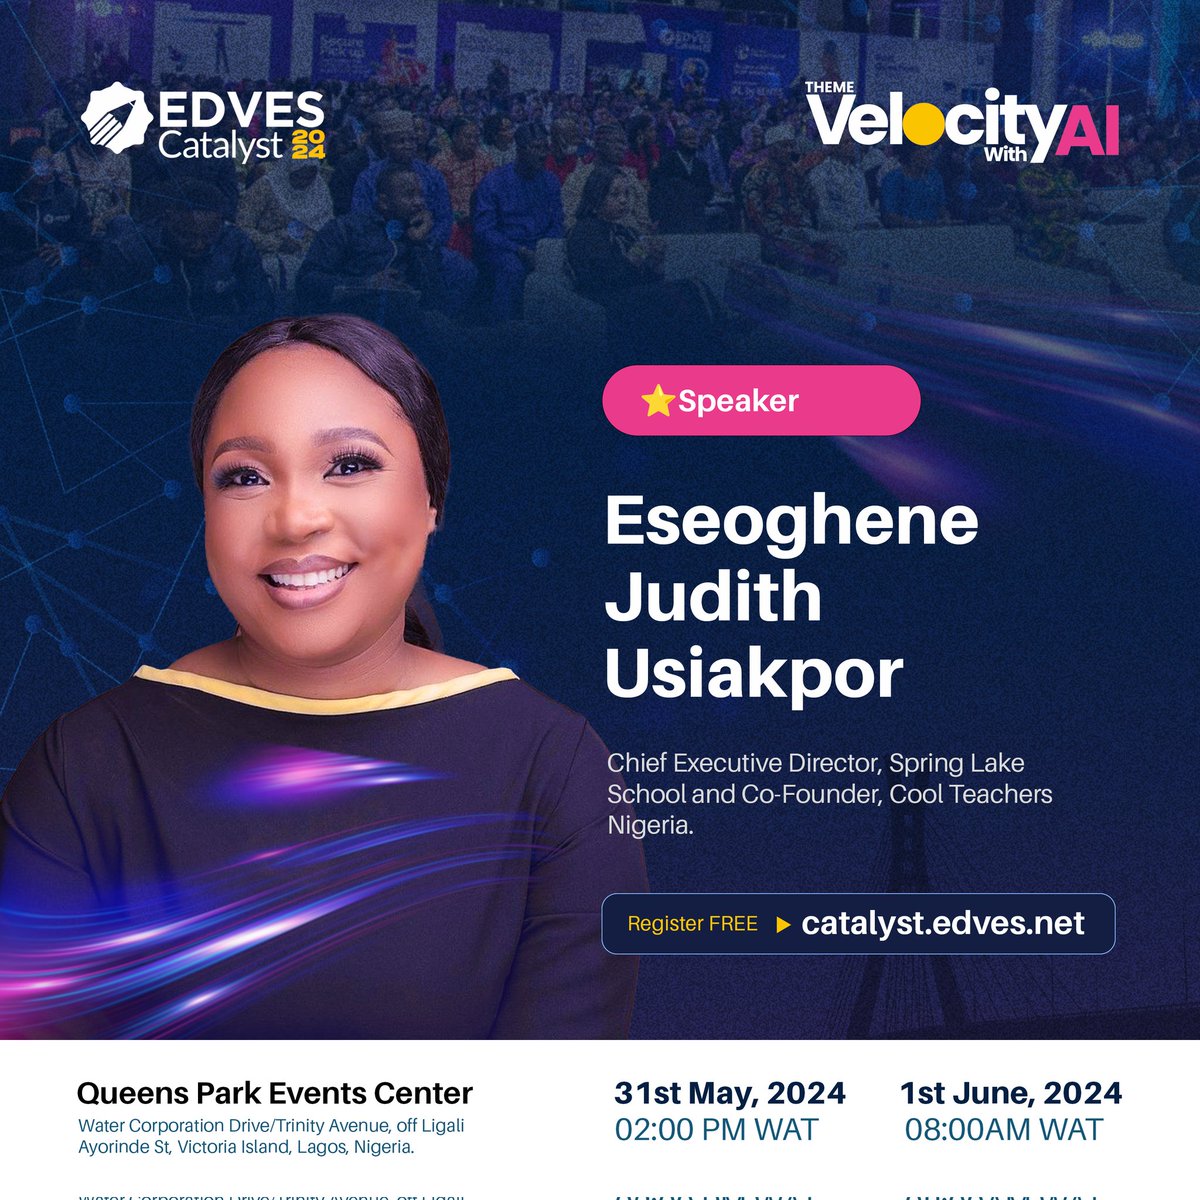 Eseoghene Judith Usiakpor is the Chief Executive Director of Spring Lake School and Co-Founder of Cool Teachers Nigeria. She is certified in the theory and practice of the Montessori method of Education and Early Childhood Education.